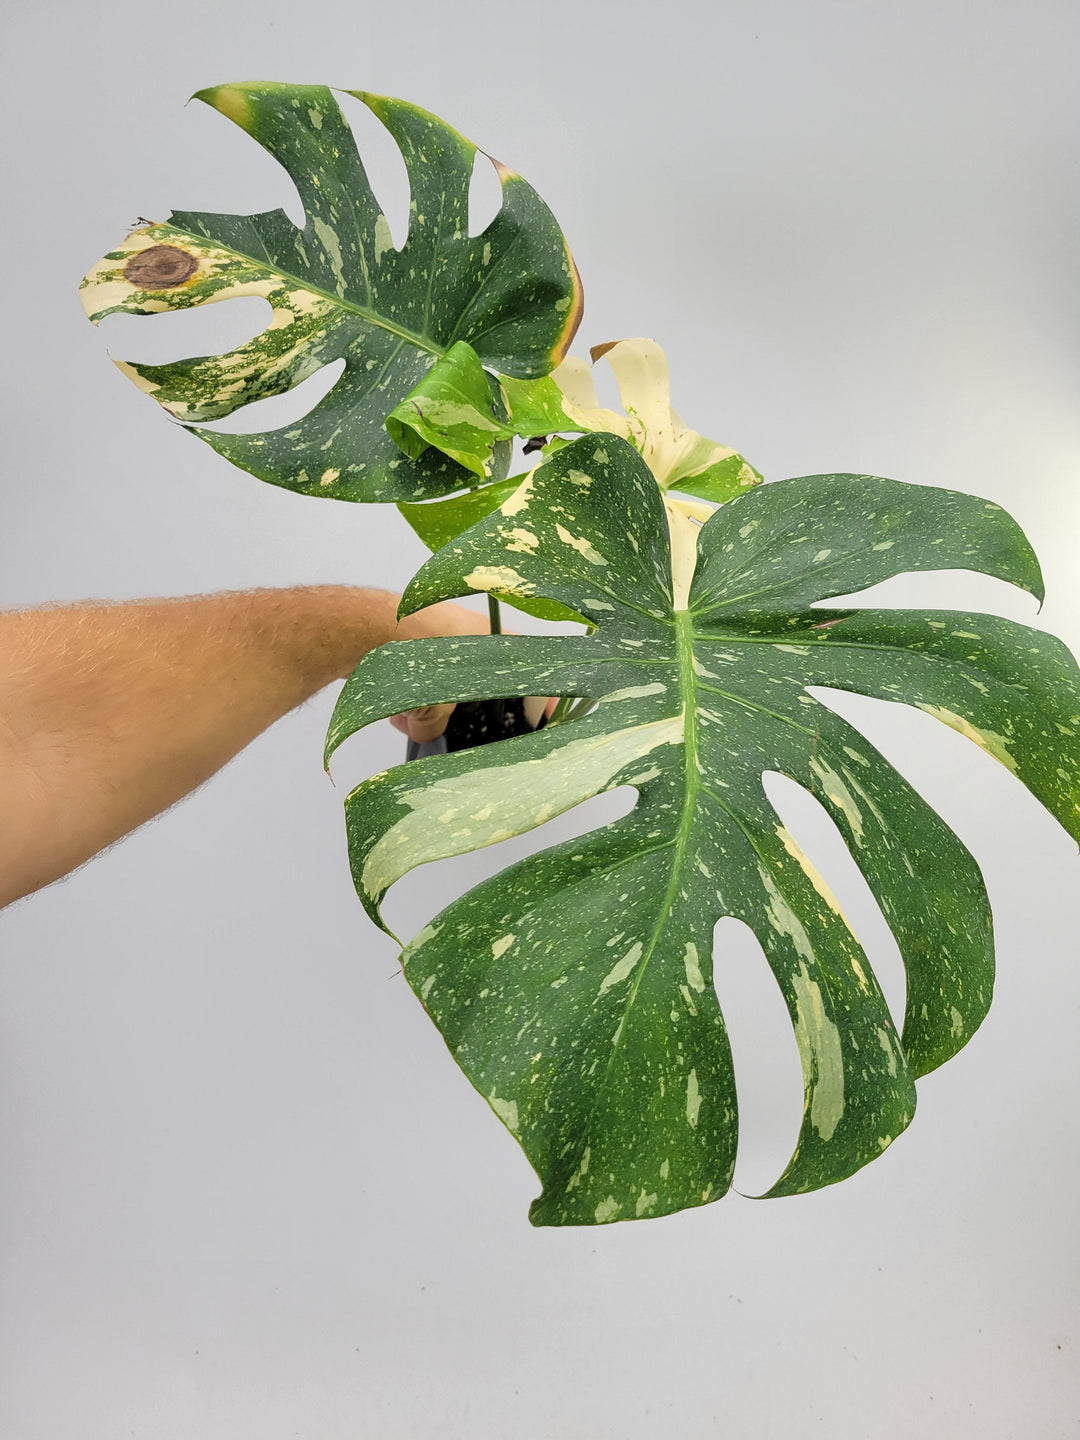 Monstera Thai Constellation, Nice XL size,  Highly variegated, Japanese Cultivar, exact plant pictured  US Seller #T3